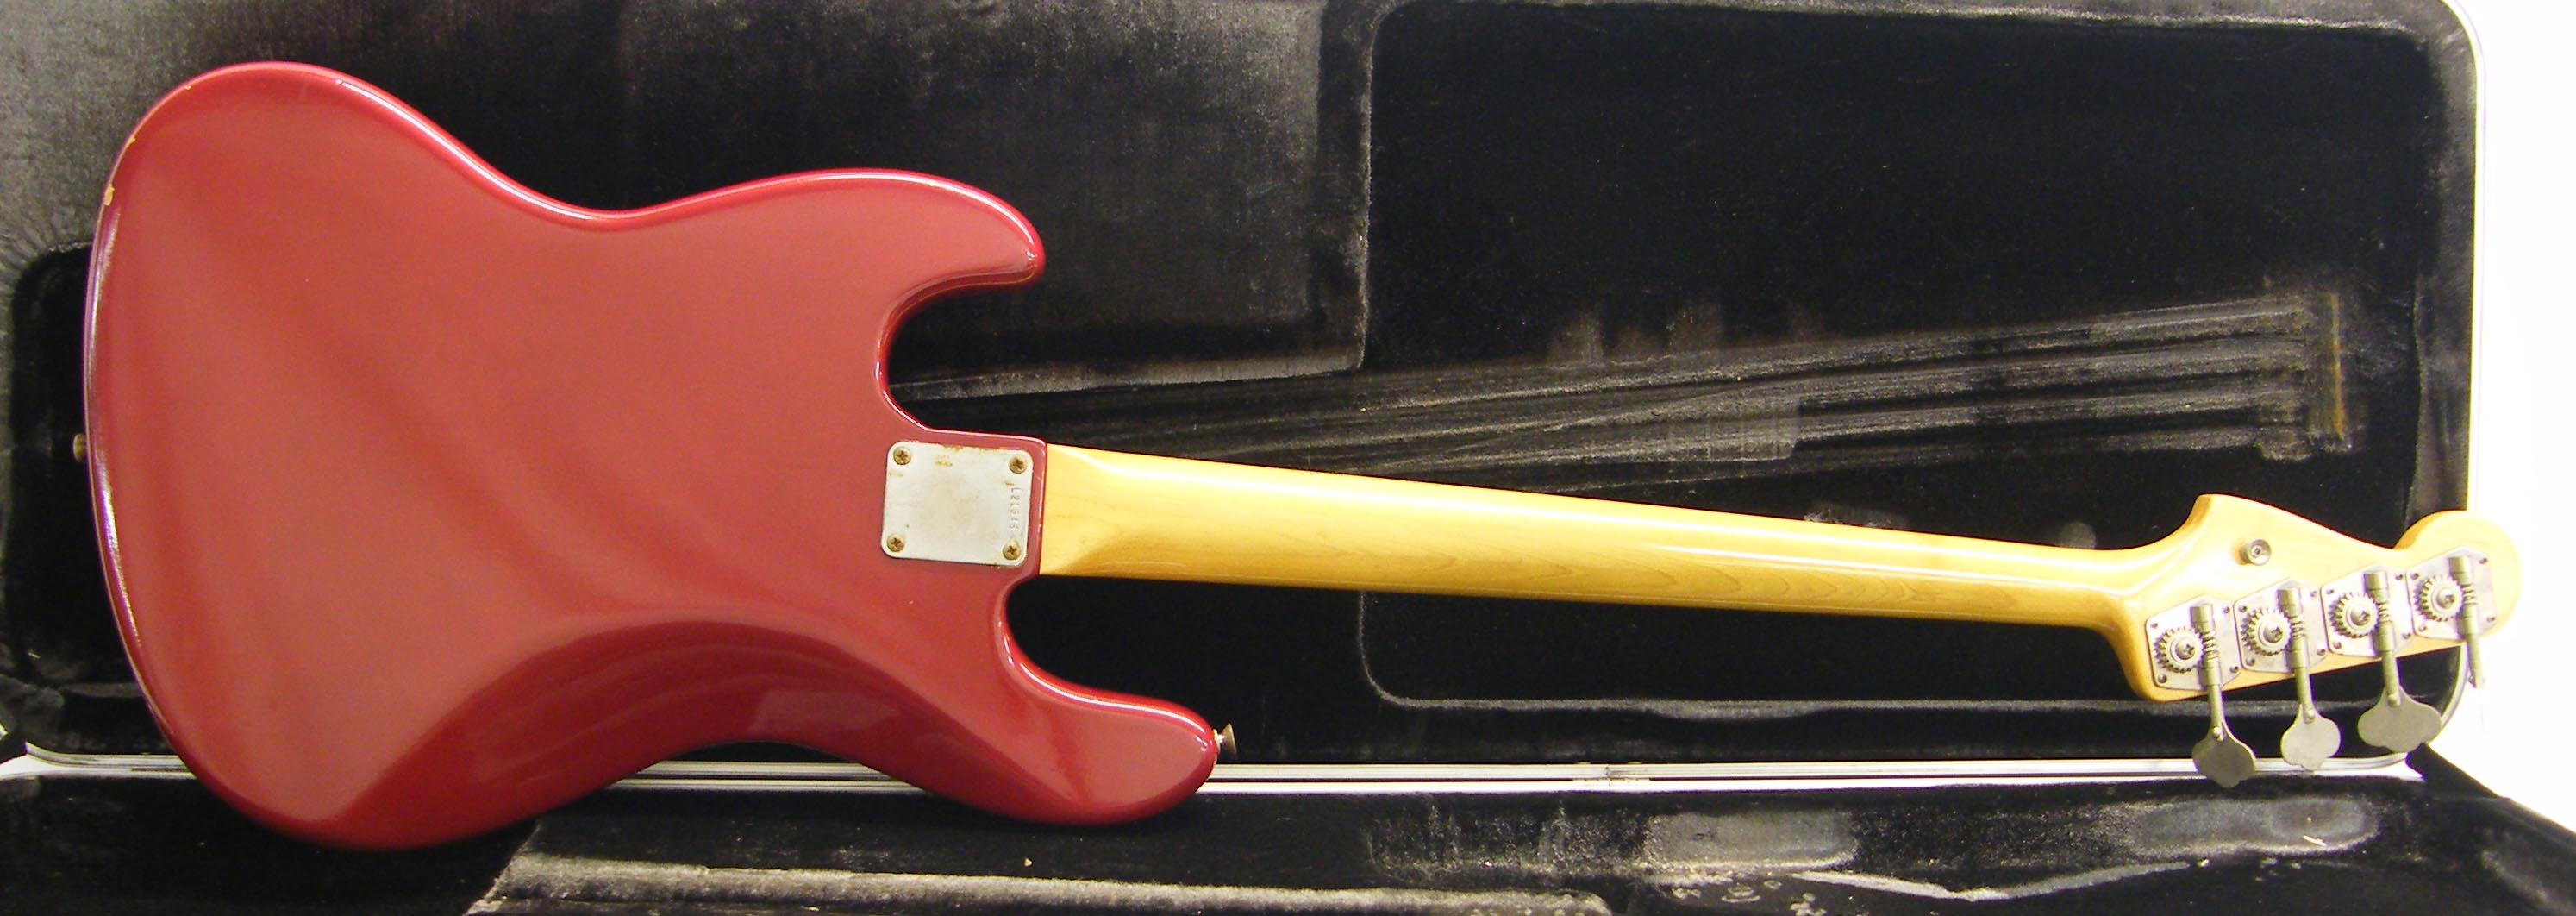 1964 Fender Jazz Bass electric bass guitar, made in USA, ser. no. L21548, red re-finish with various - Image 2 of 9